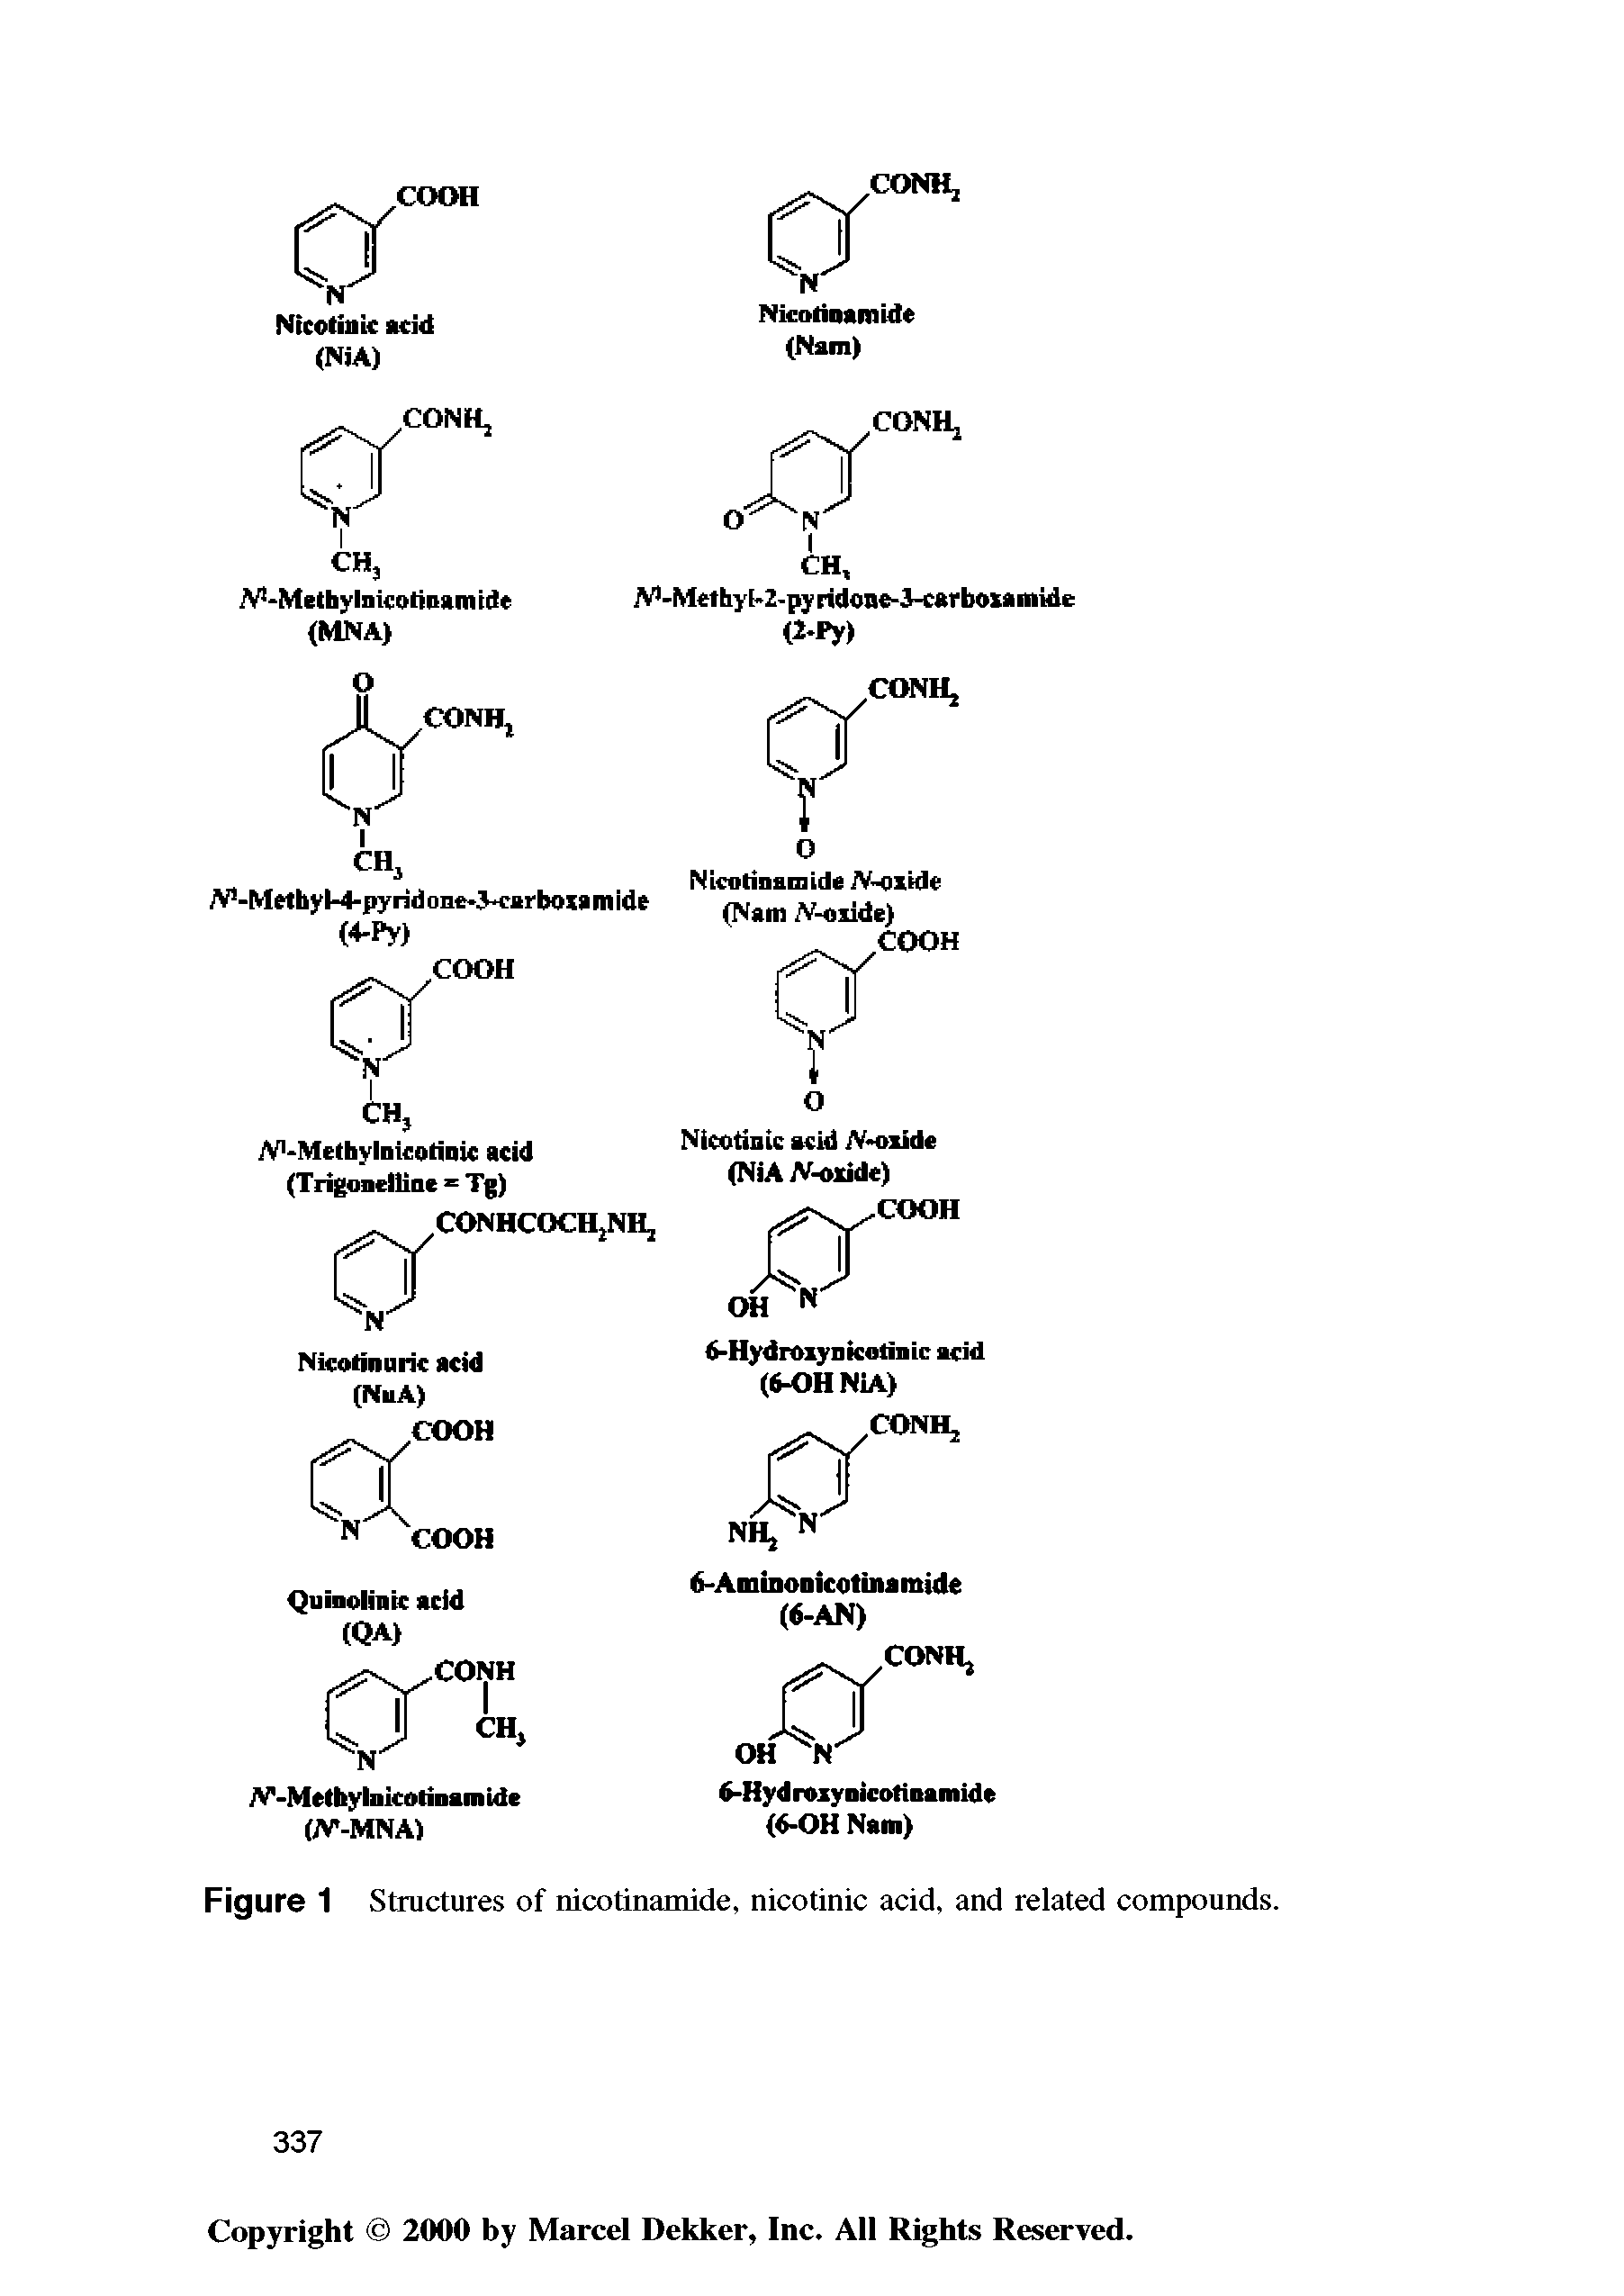 Figure 1 Structures of nicotinamide, nicotinic acid, and related compounds.